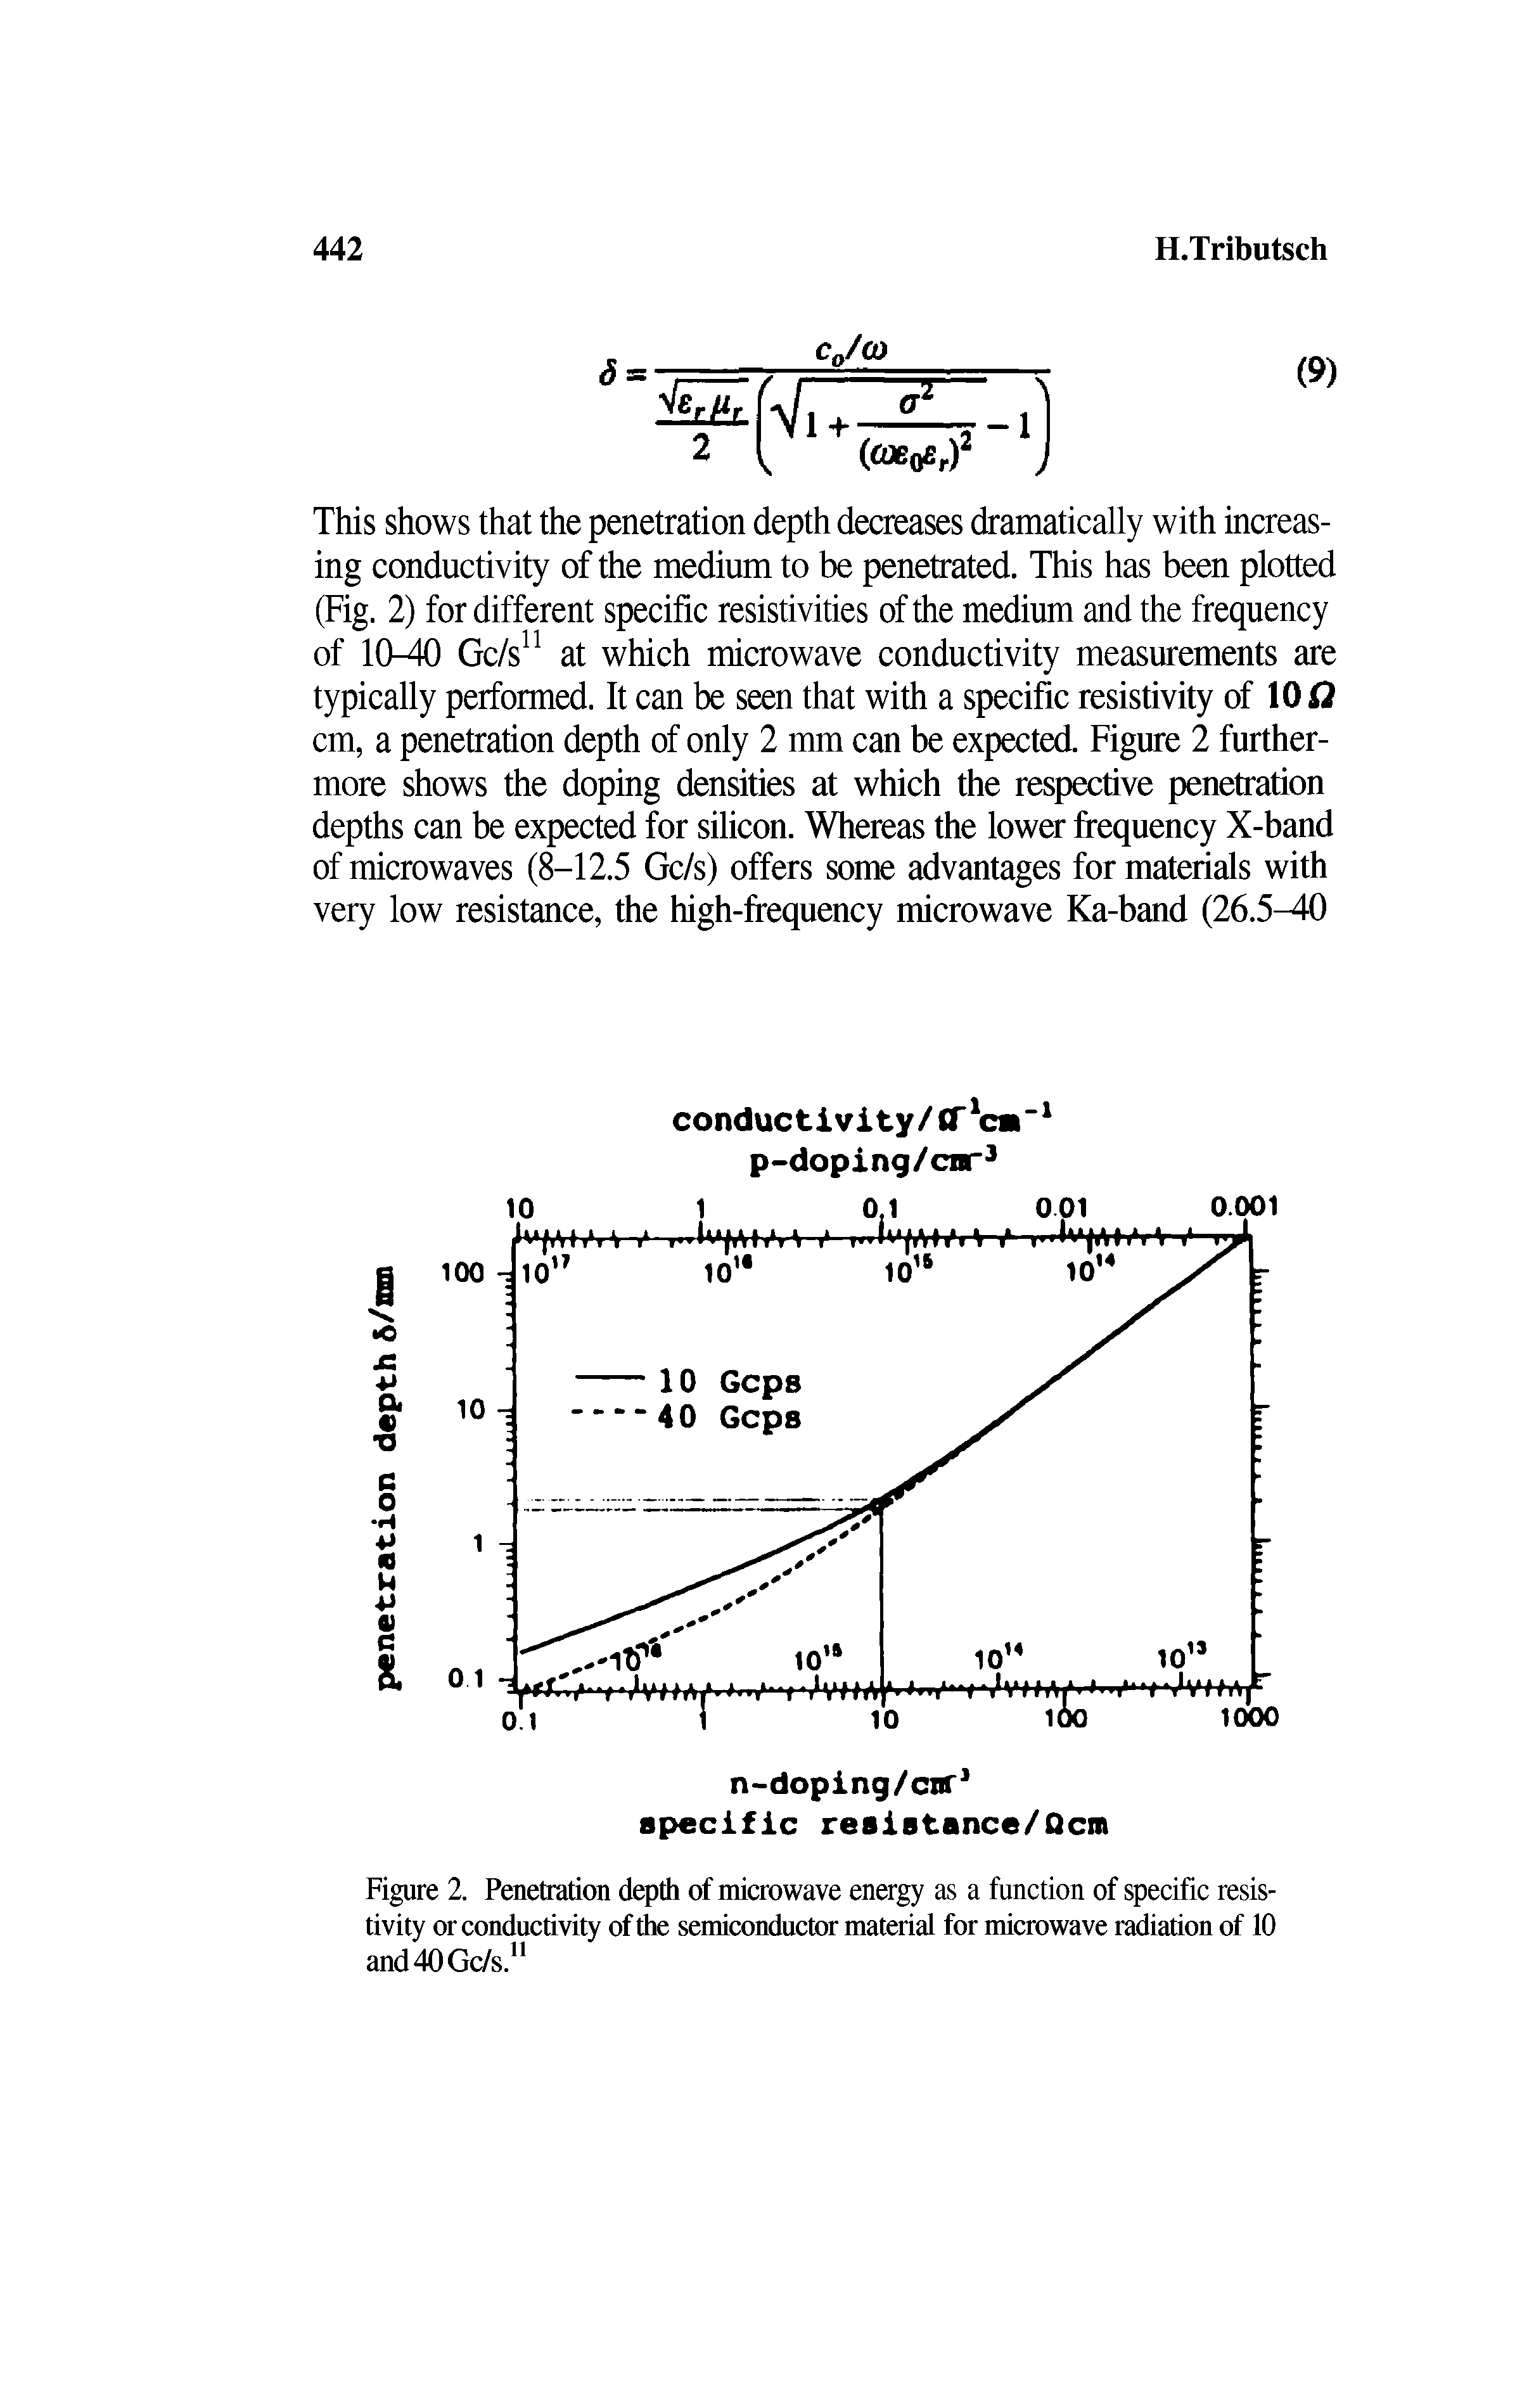 Figure 2. Penetration depth of microwave energy as a function of specific resistivity or conductivity of the semiconductor material for microwave radiation of 10 and 40 Gc/s.11...